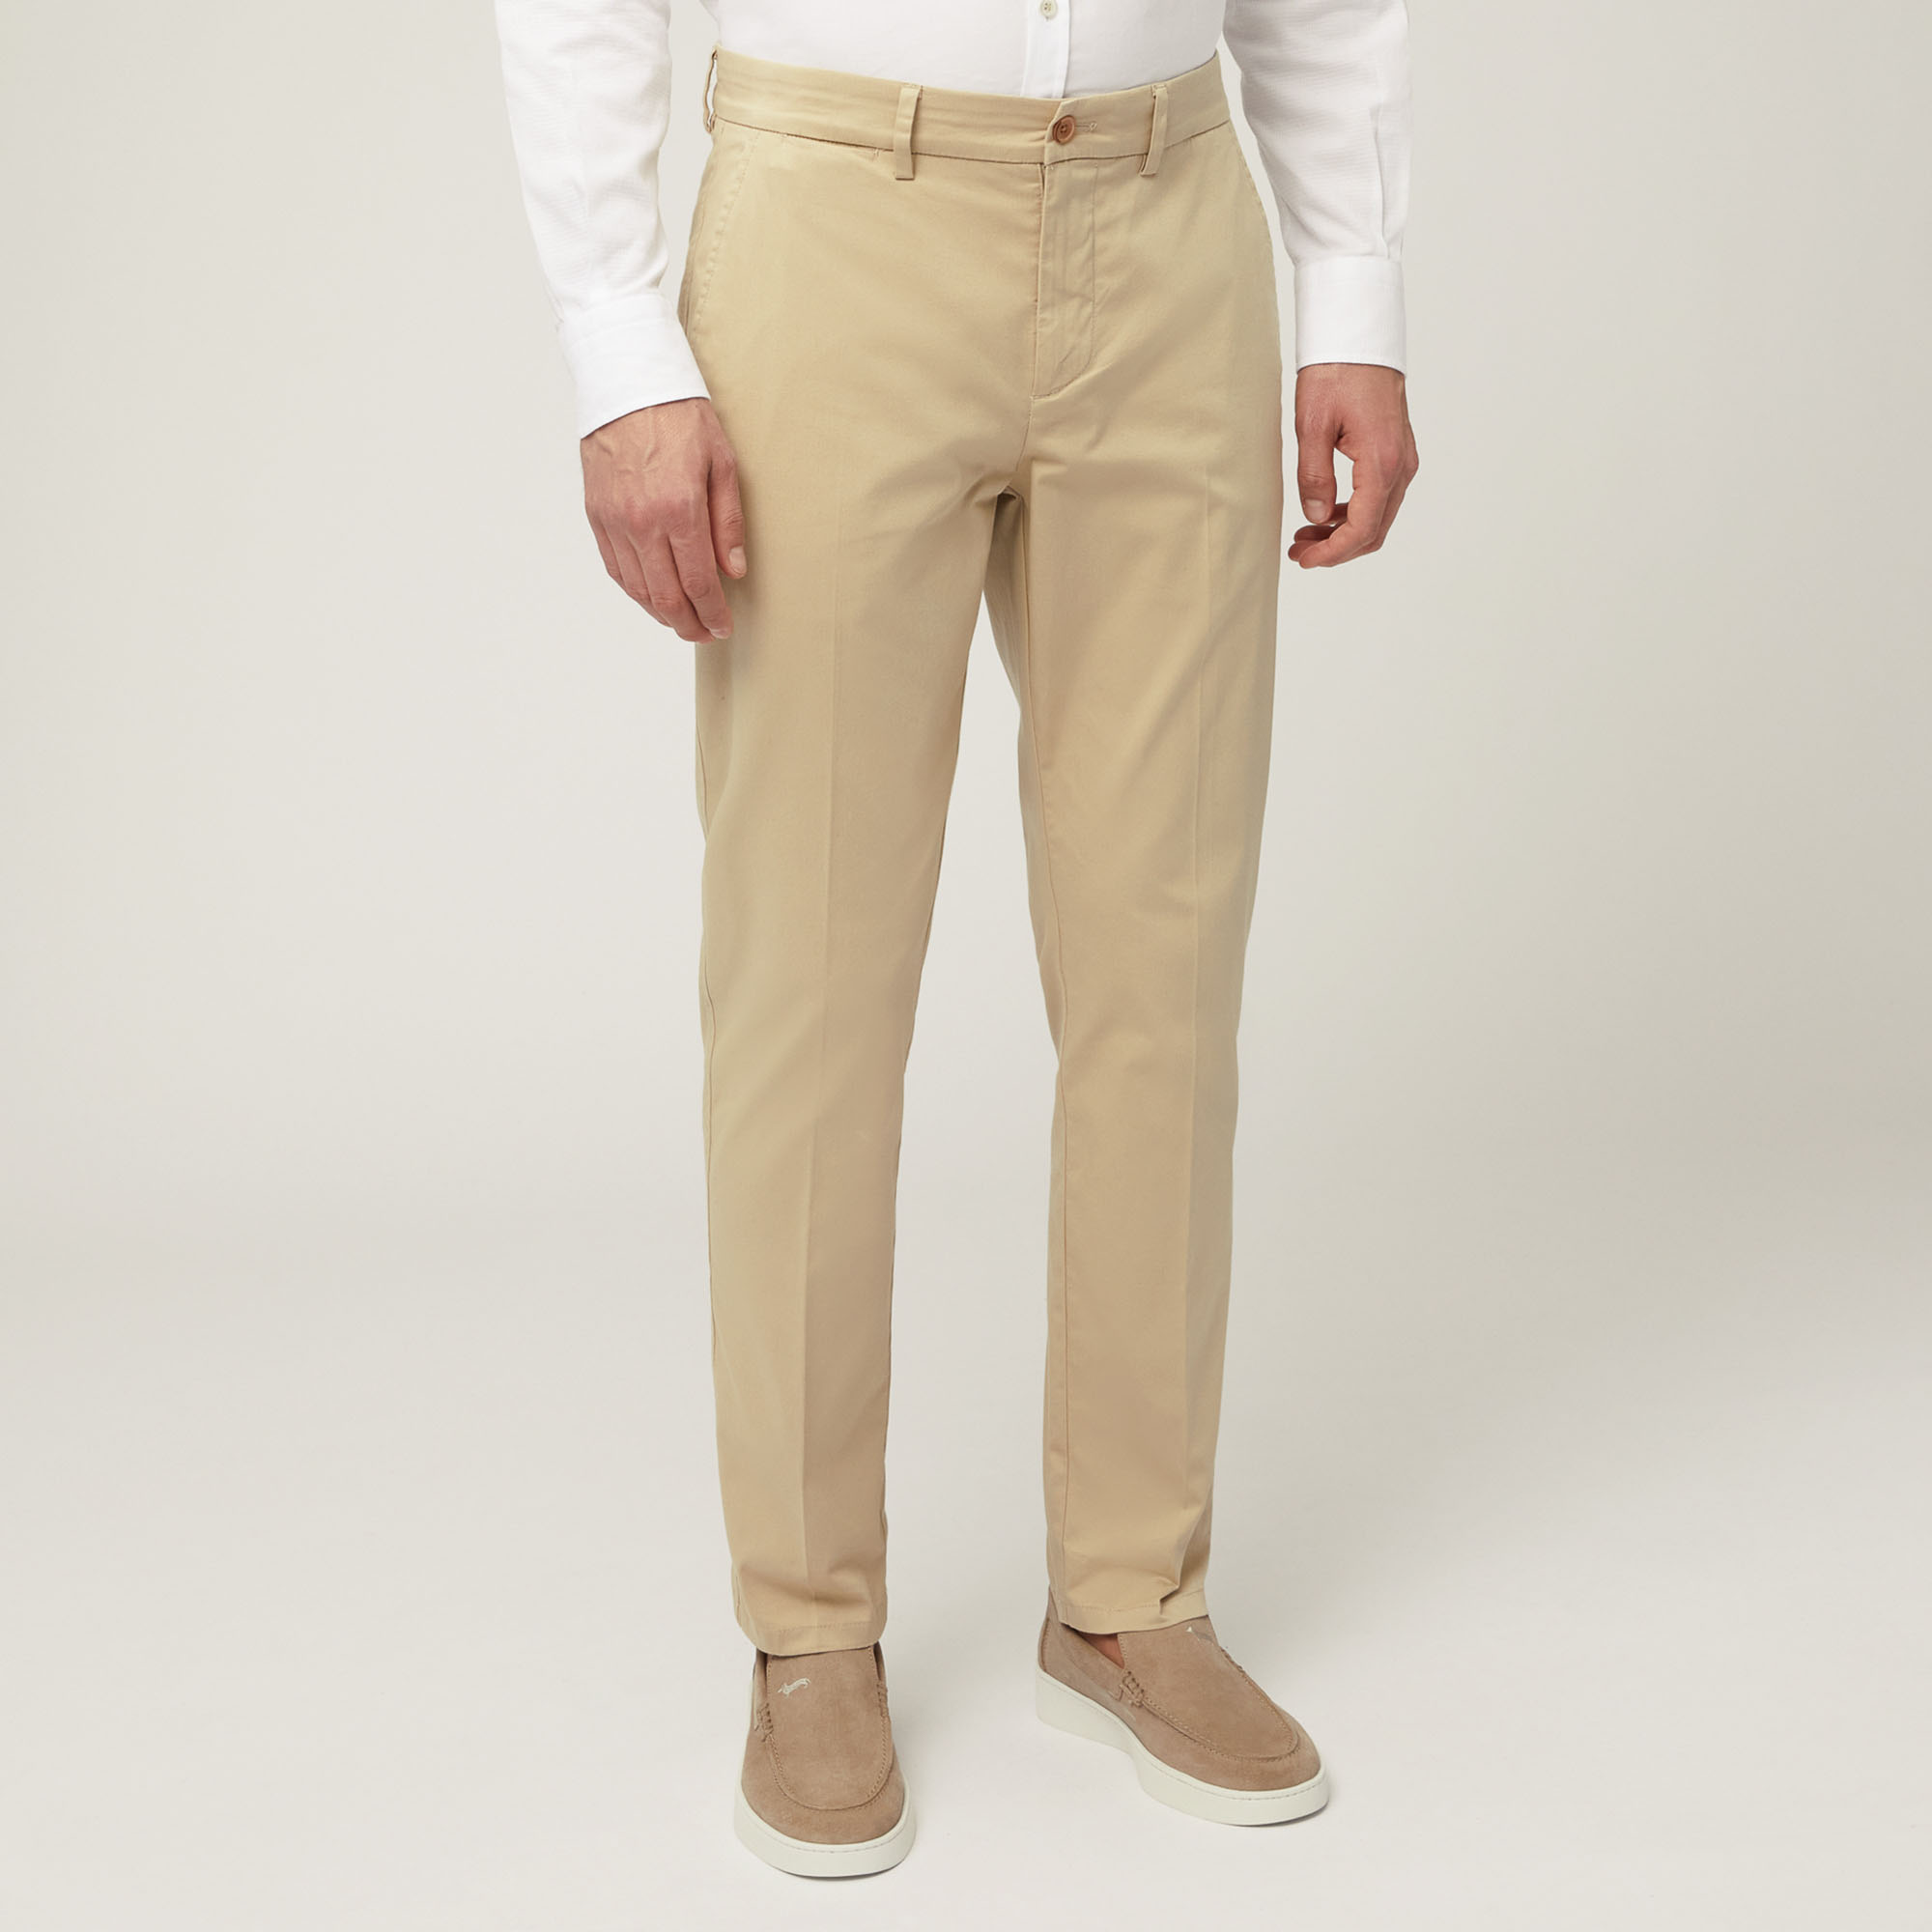 Narrow Fit Chino Pants, Beige, large